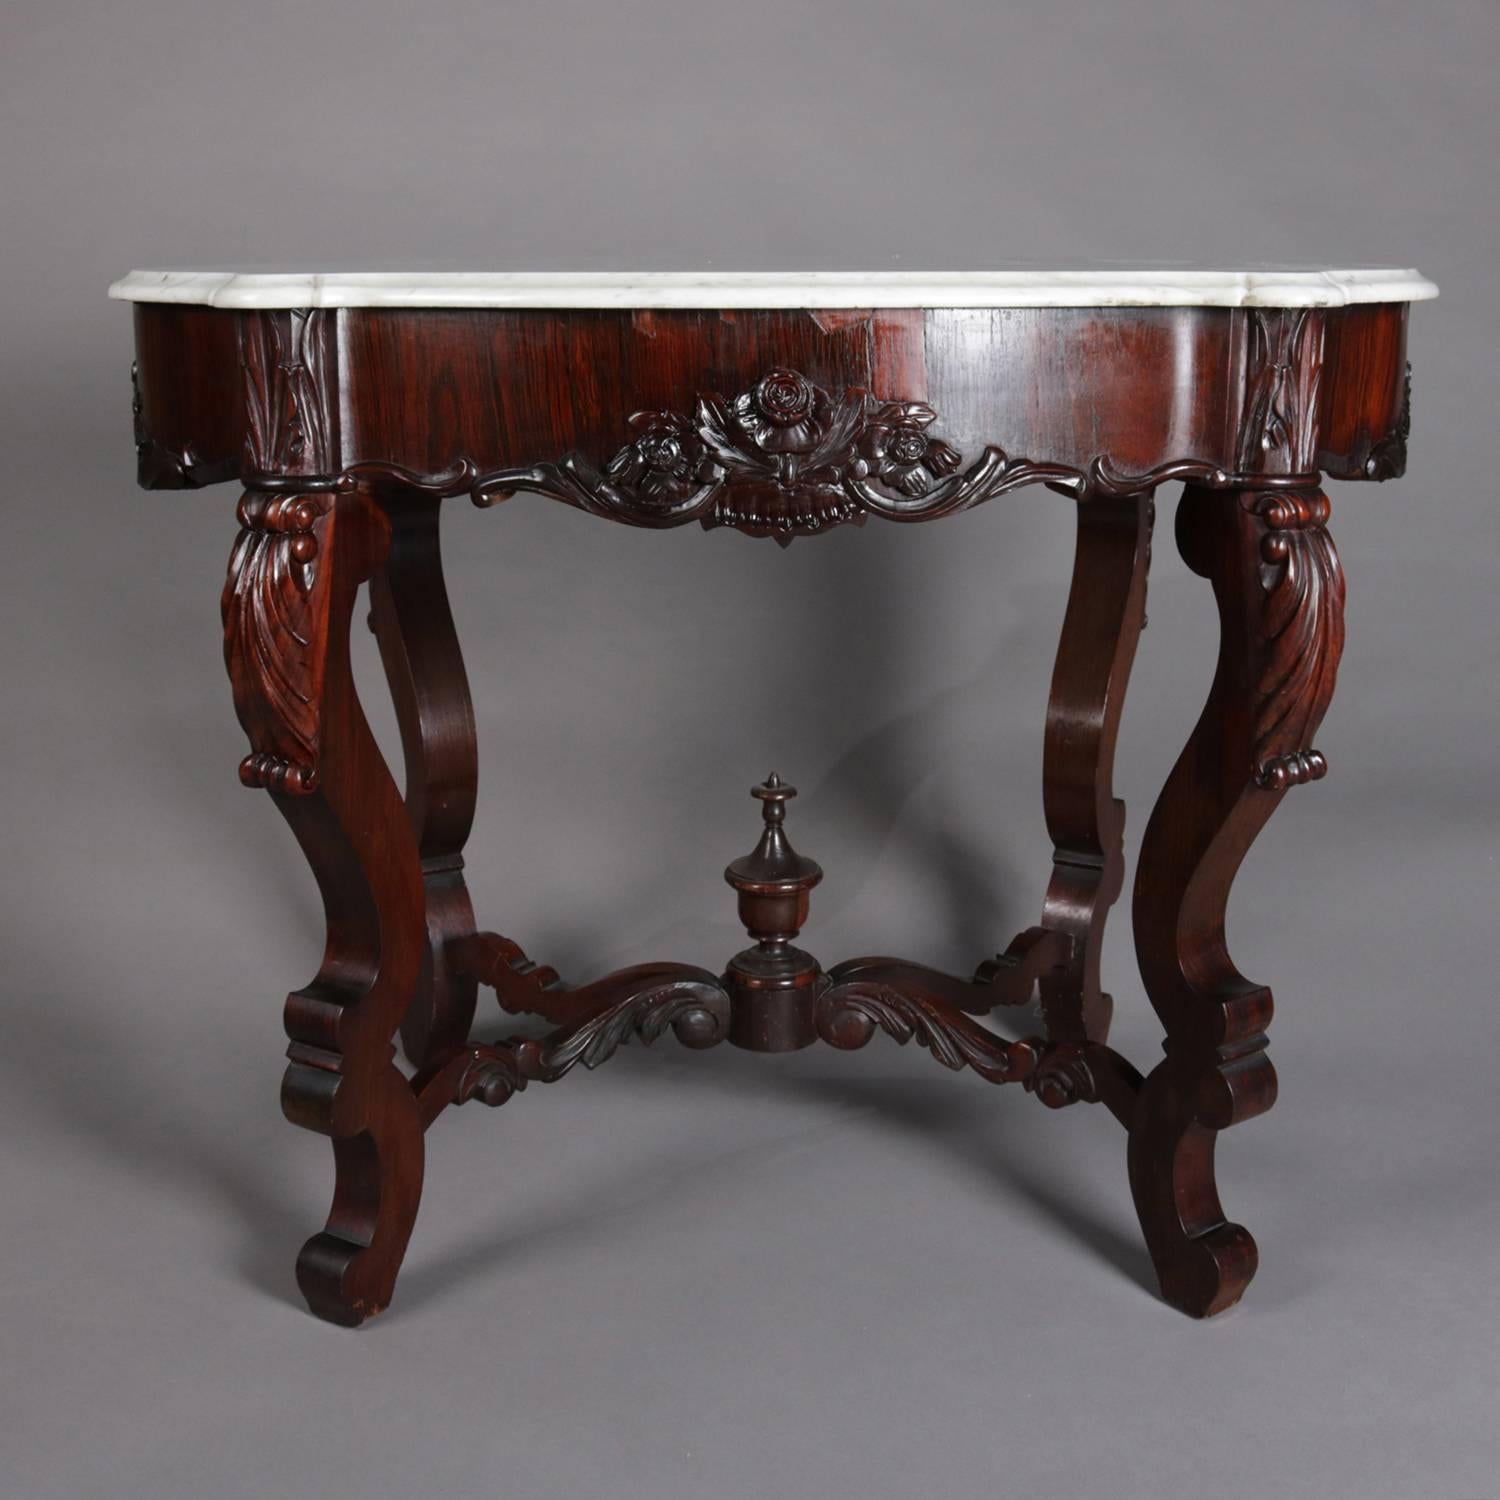 Antique Victorian Rococo carved rosewood parlor table features turtle top beveled marble supported by deep serpentine apron with floral carving, raised on scroll form cabriole legs with carved acanthus knees having scroll and acanthus stretchers